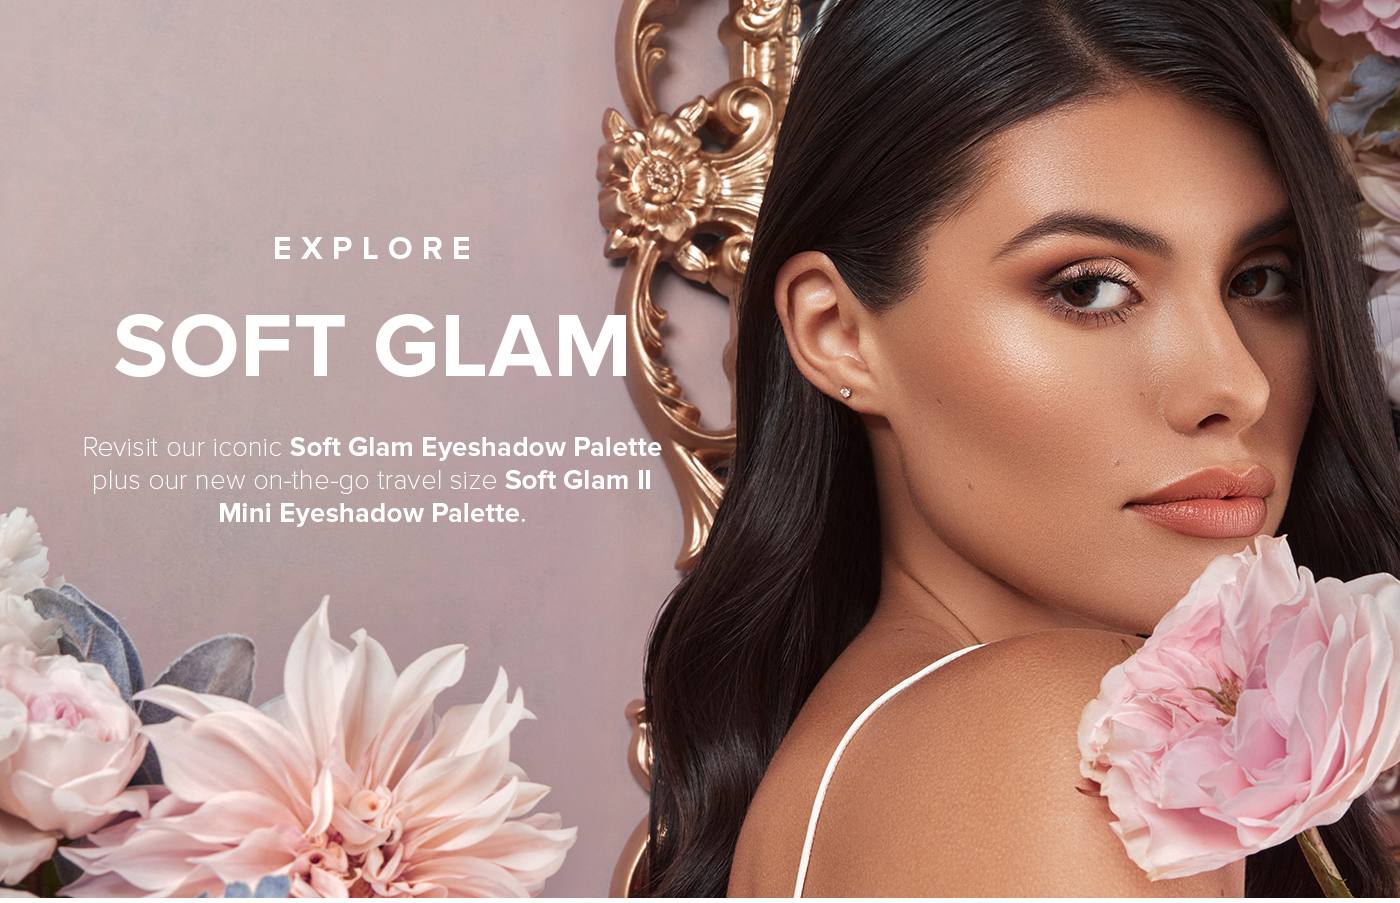 Soft Glam, Our Iconic Palette Now On-The-Go! - Shop Now